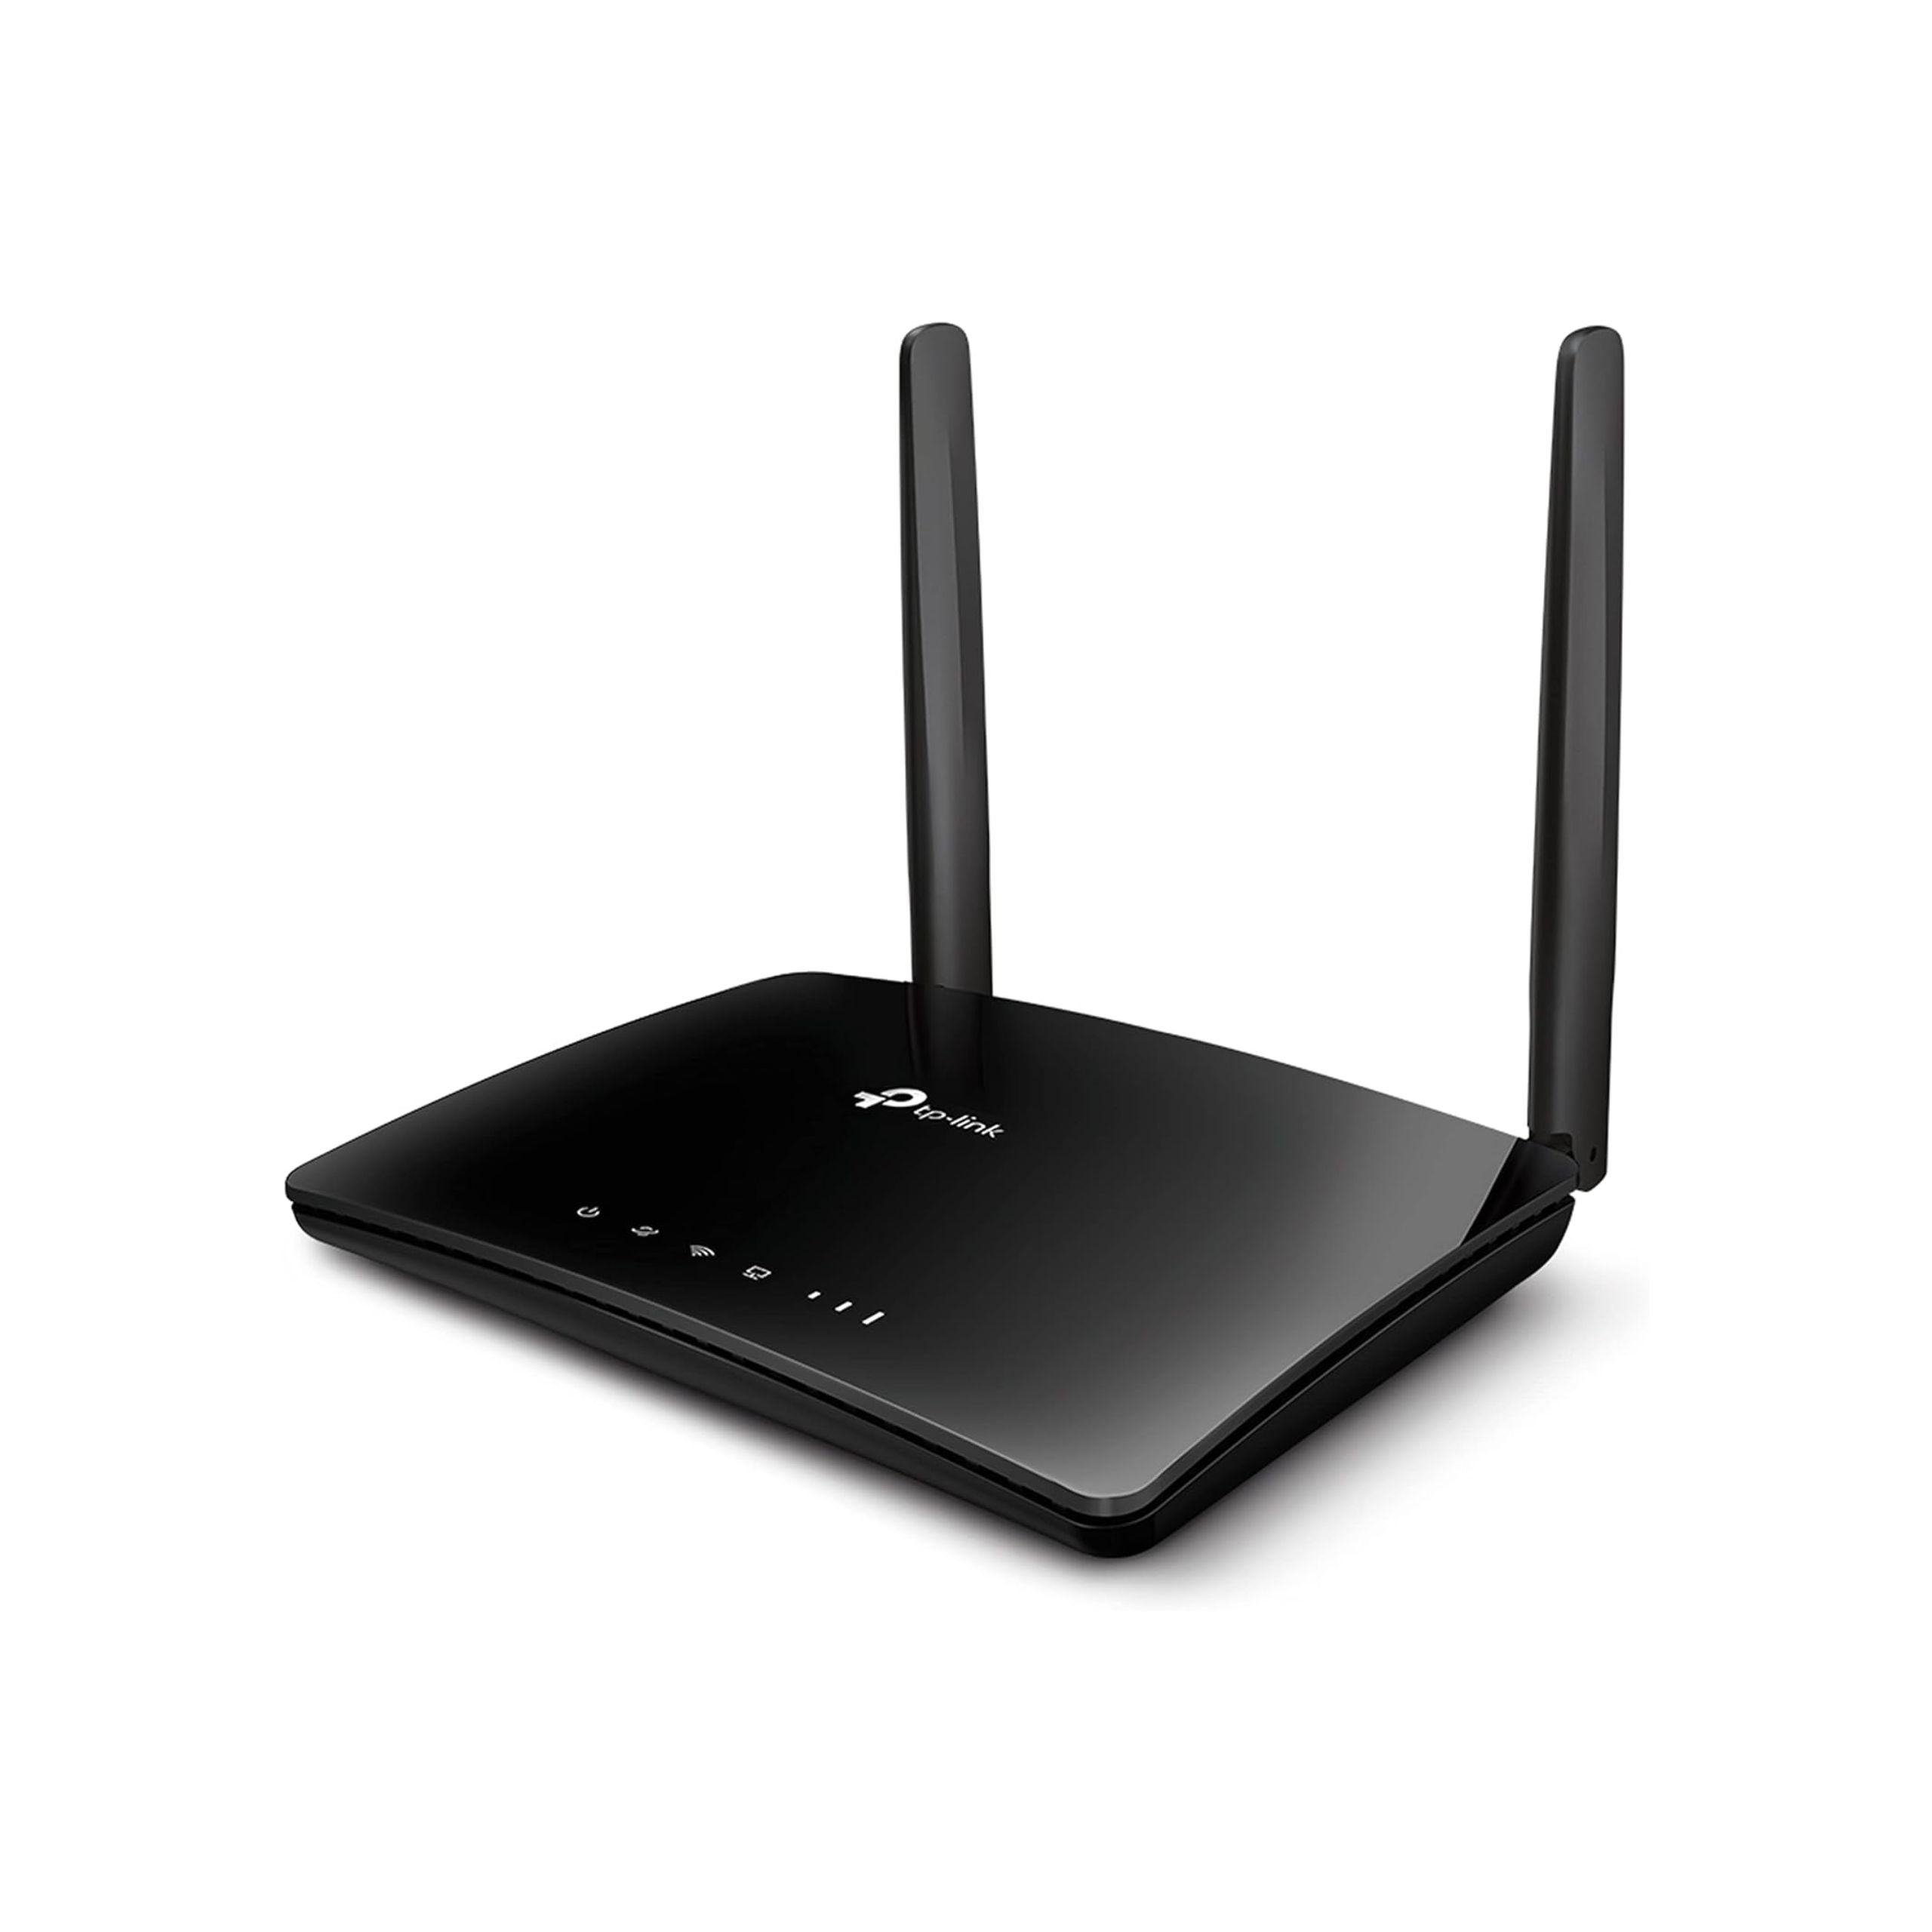 TP-Link AC750 Dual Band Wi-Fi 4G LTE Router - Black